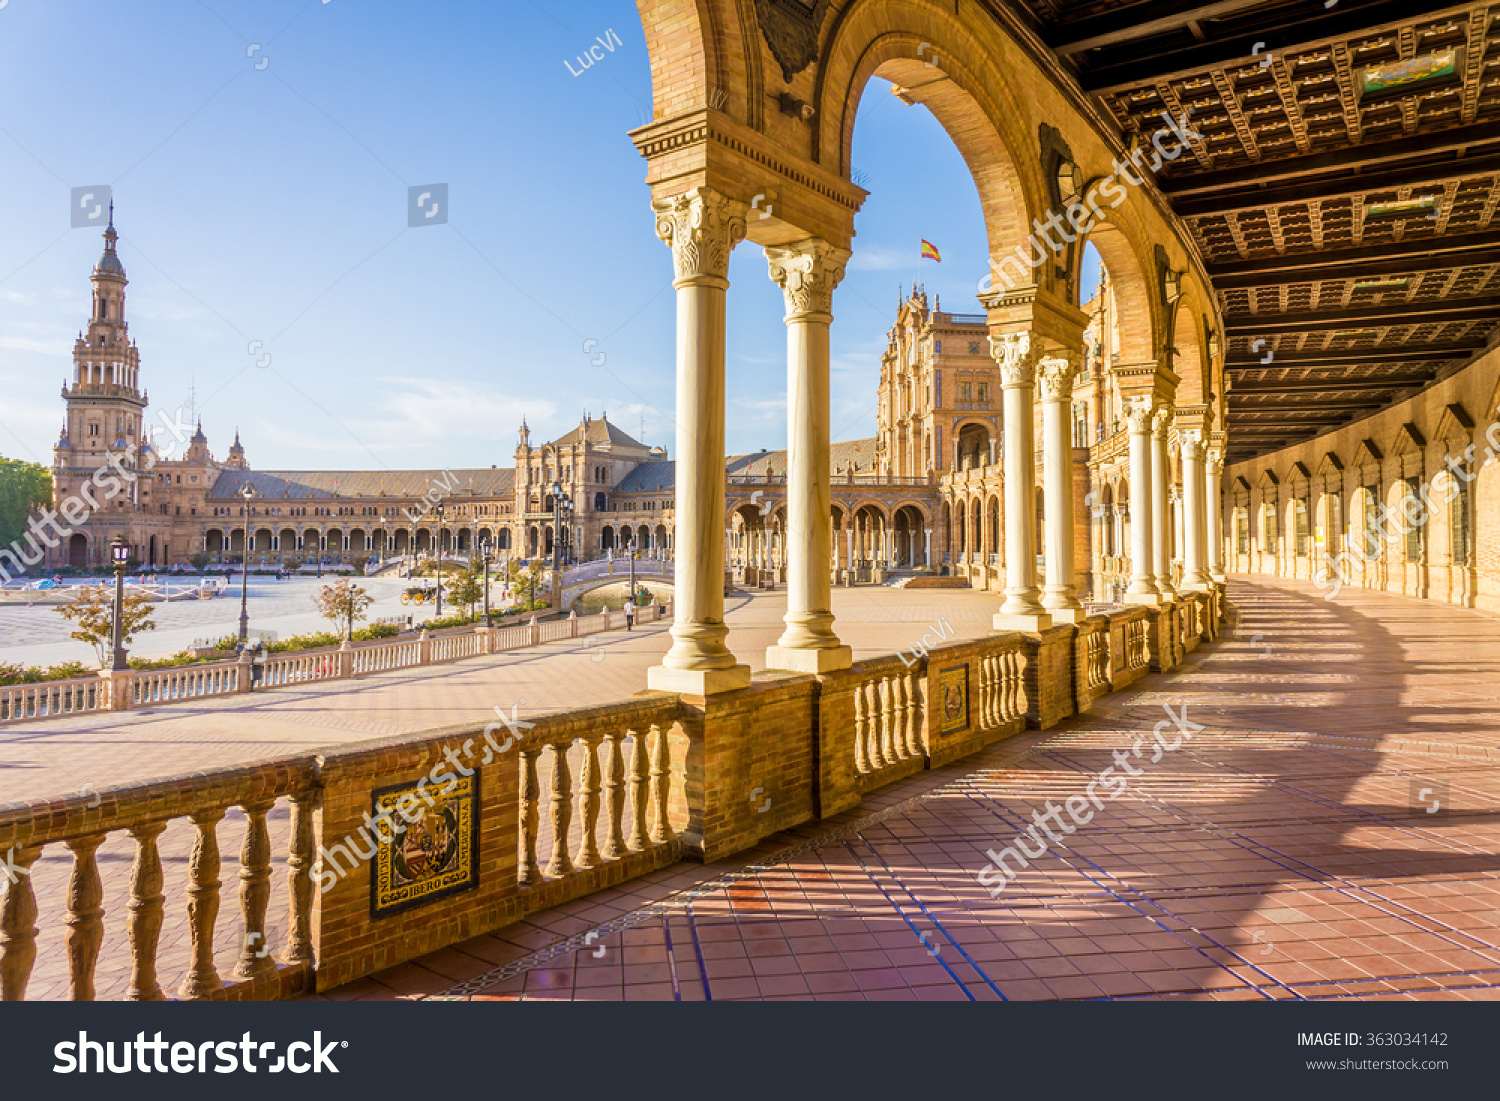 Spain Square (Plaza de Espana), Seville, Spain, built on 1928, it is one example of the Regionalism Architecture mixing Renaissance and Moorish styles. #363034142